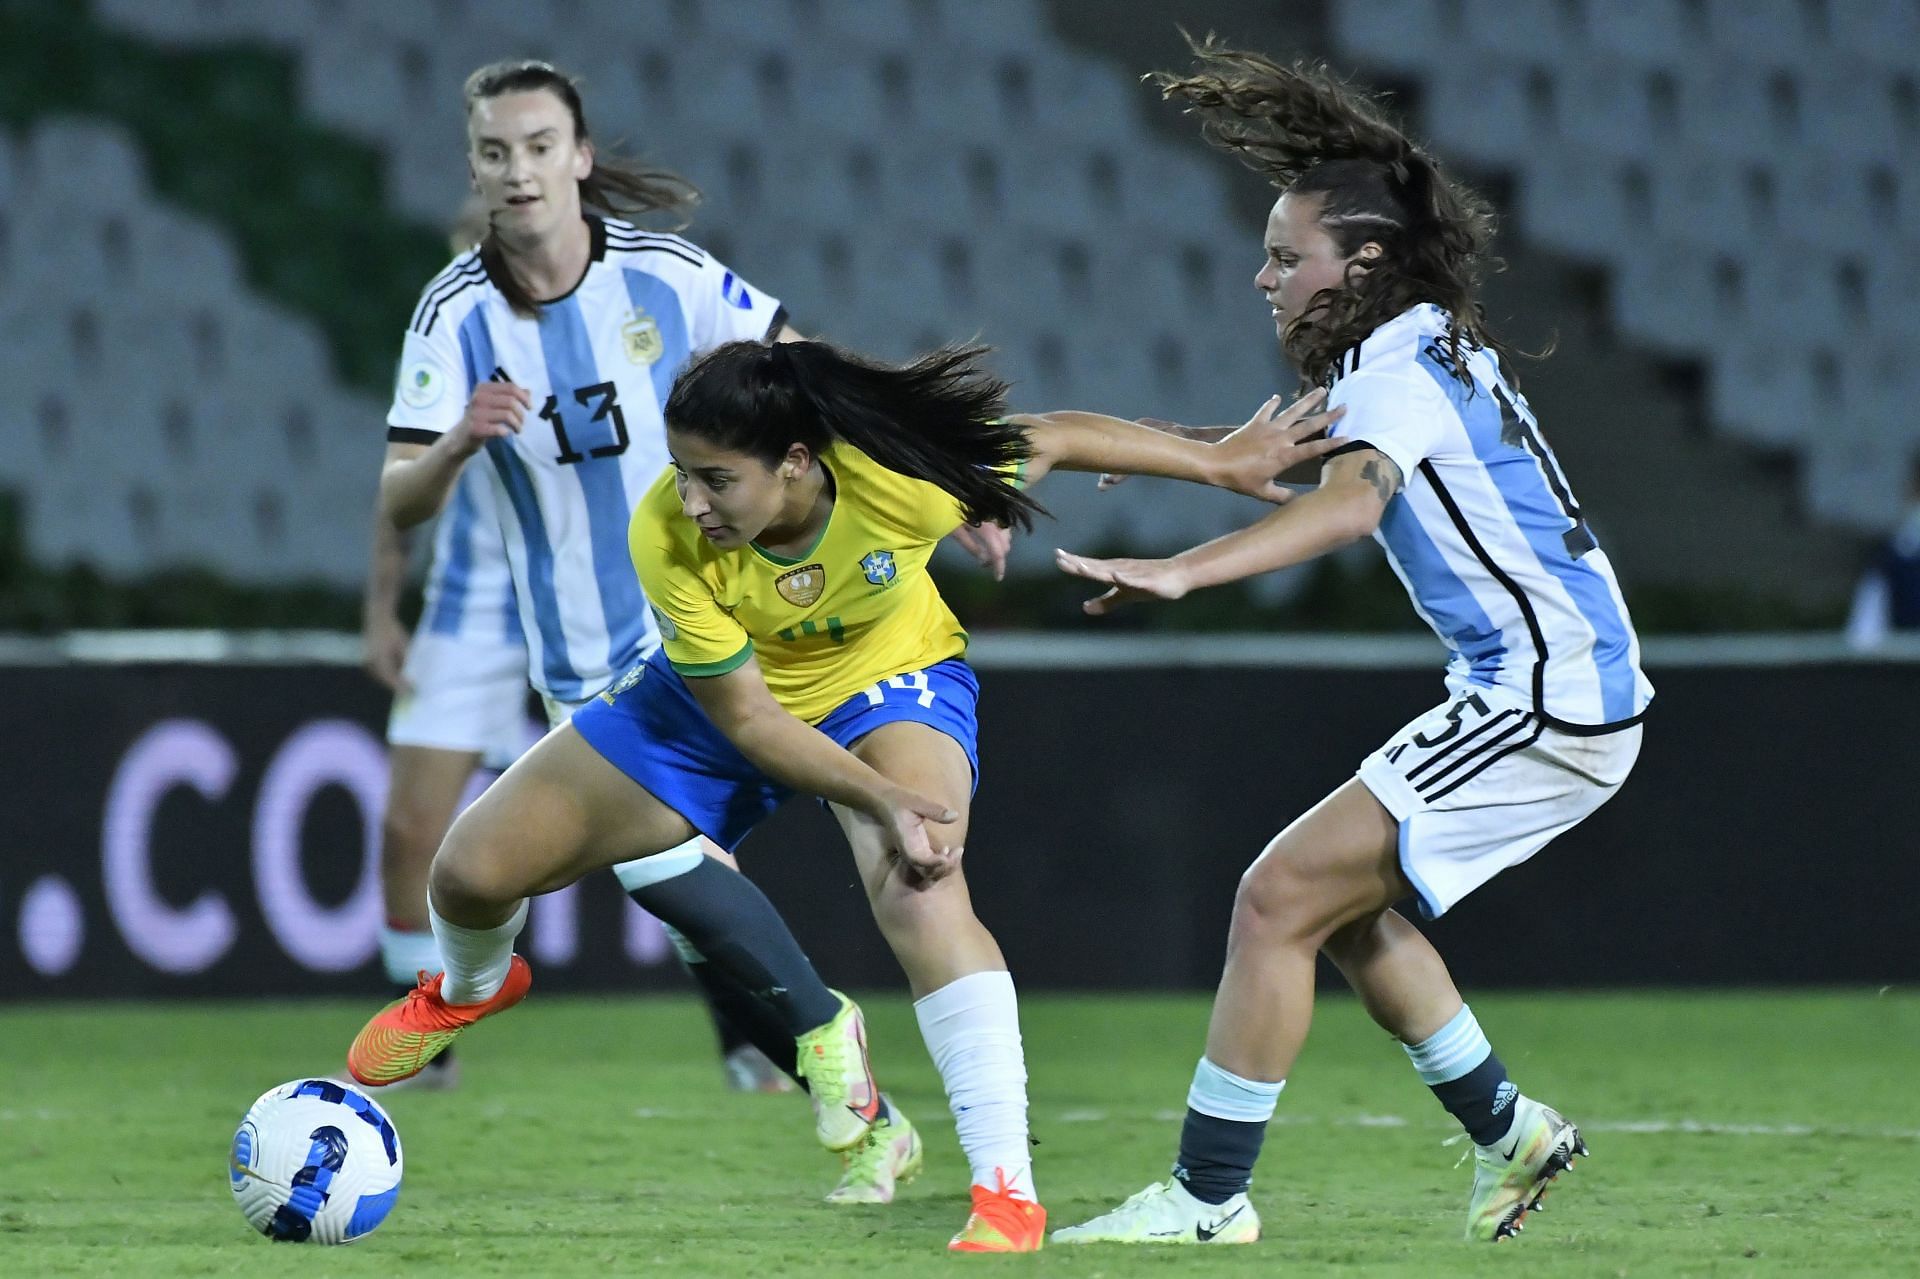 Brazil outplayed Argentina in their opening game of the tournament.